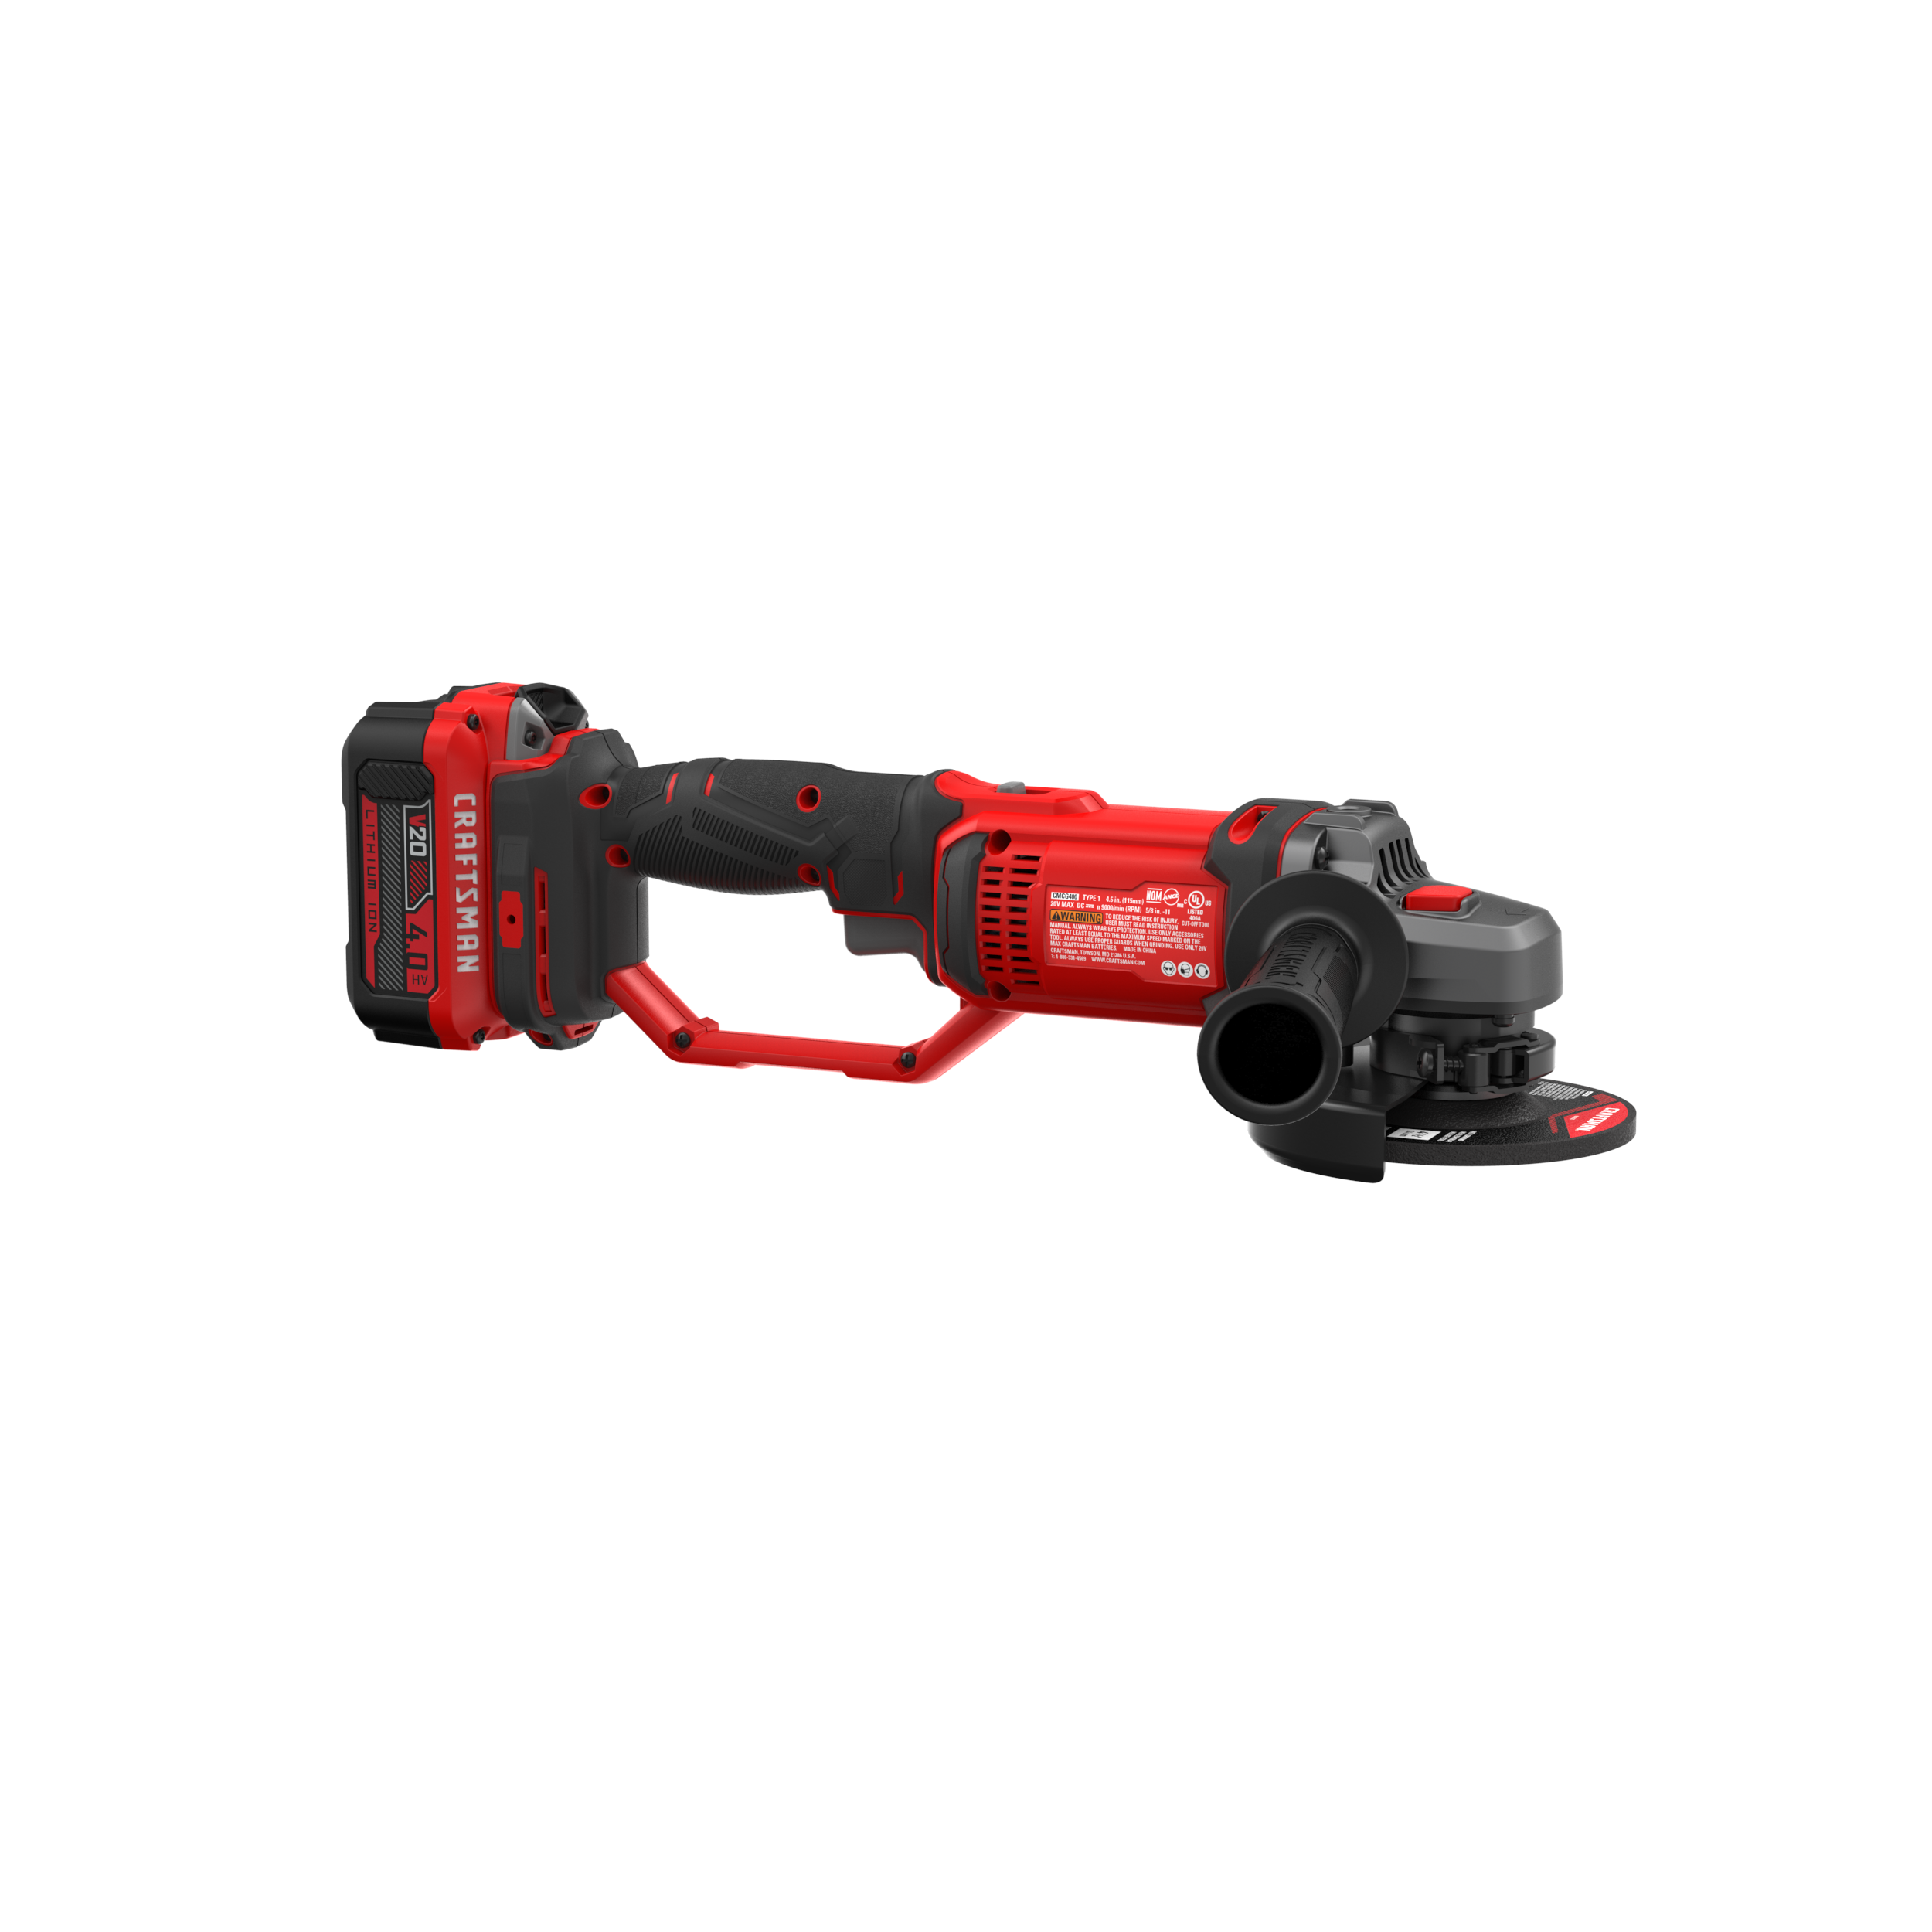 V20* Cordless 4-1/2-in Small Angle Grinder Kit (1 Battery) - Craftsman